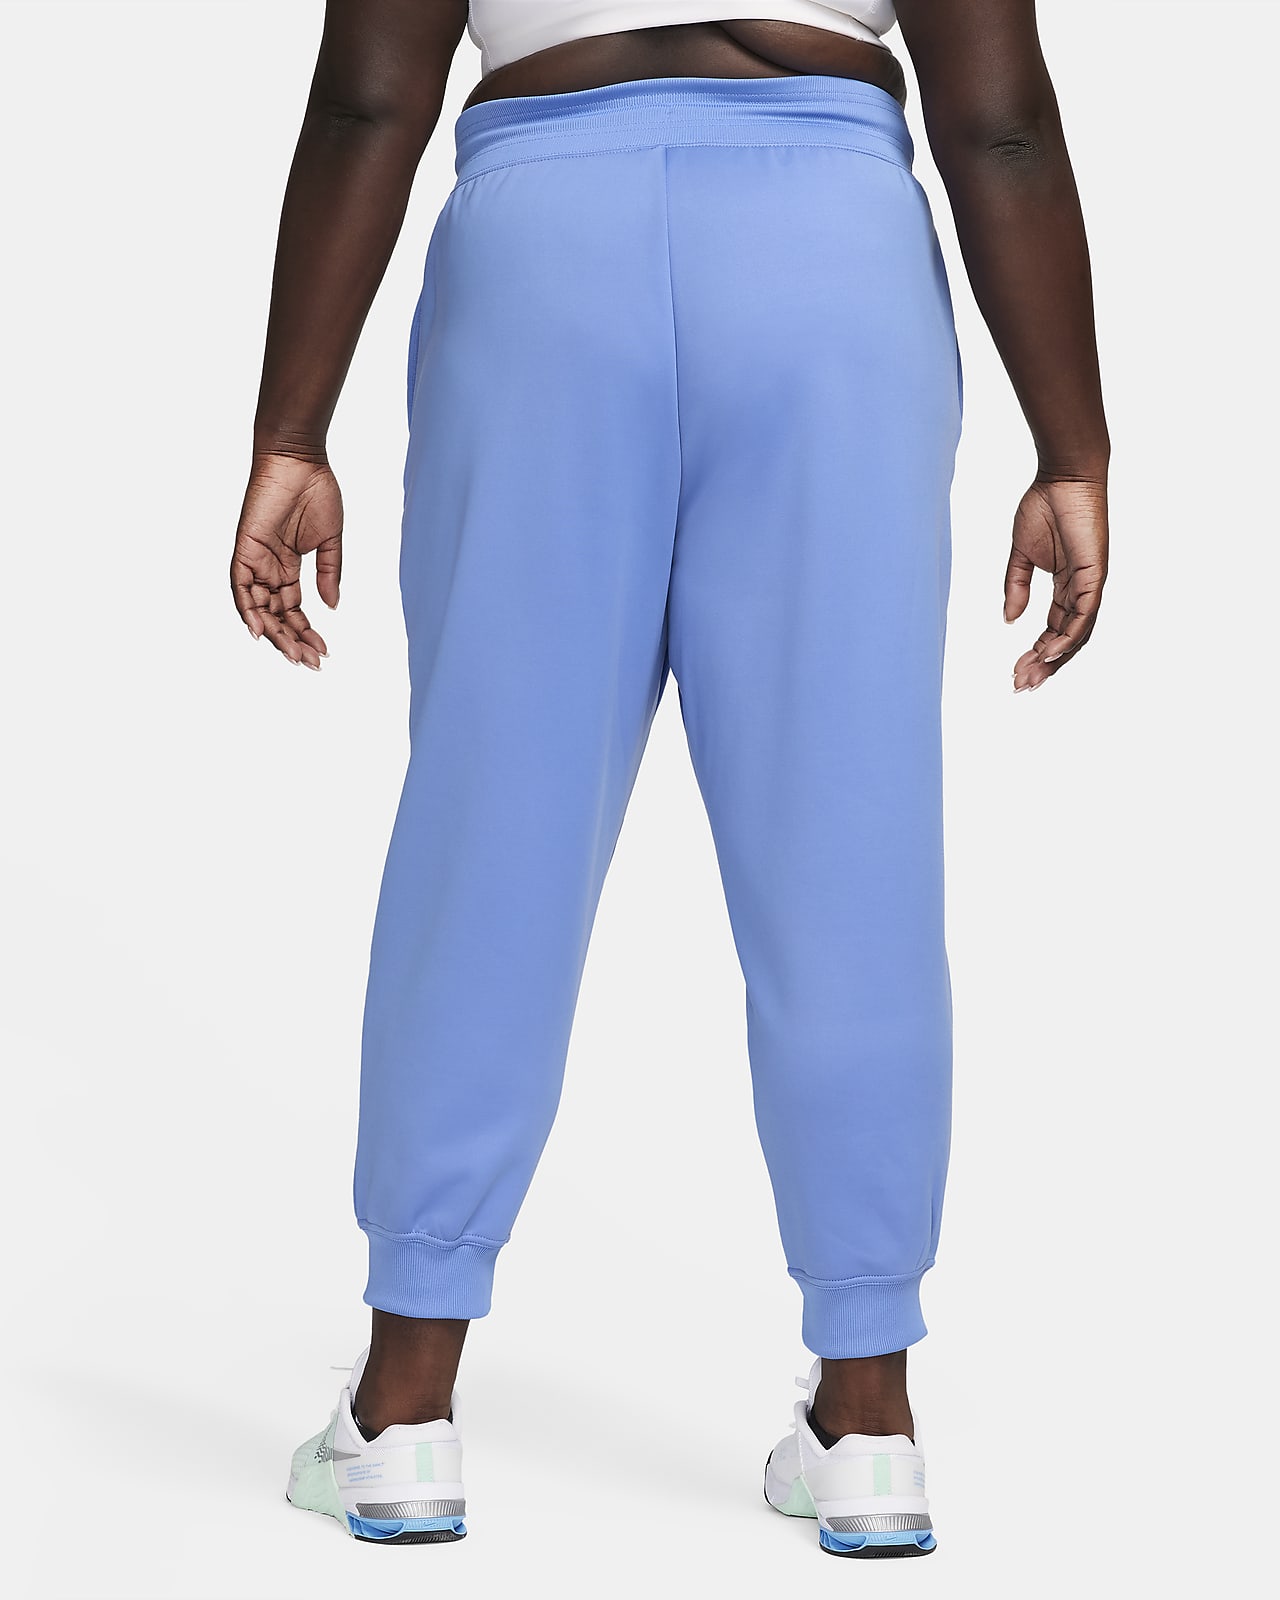  Sweatpants for Women, High Waisted Jogging Pants